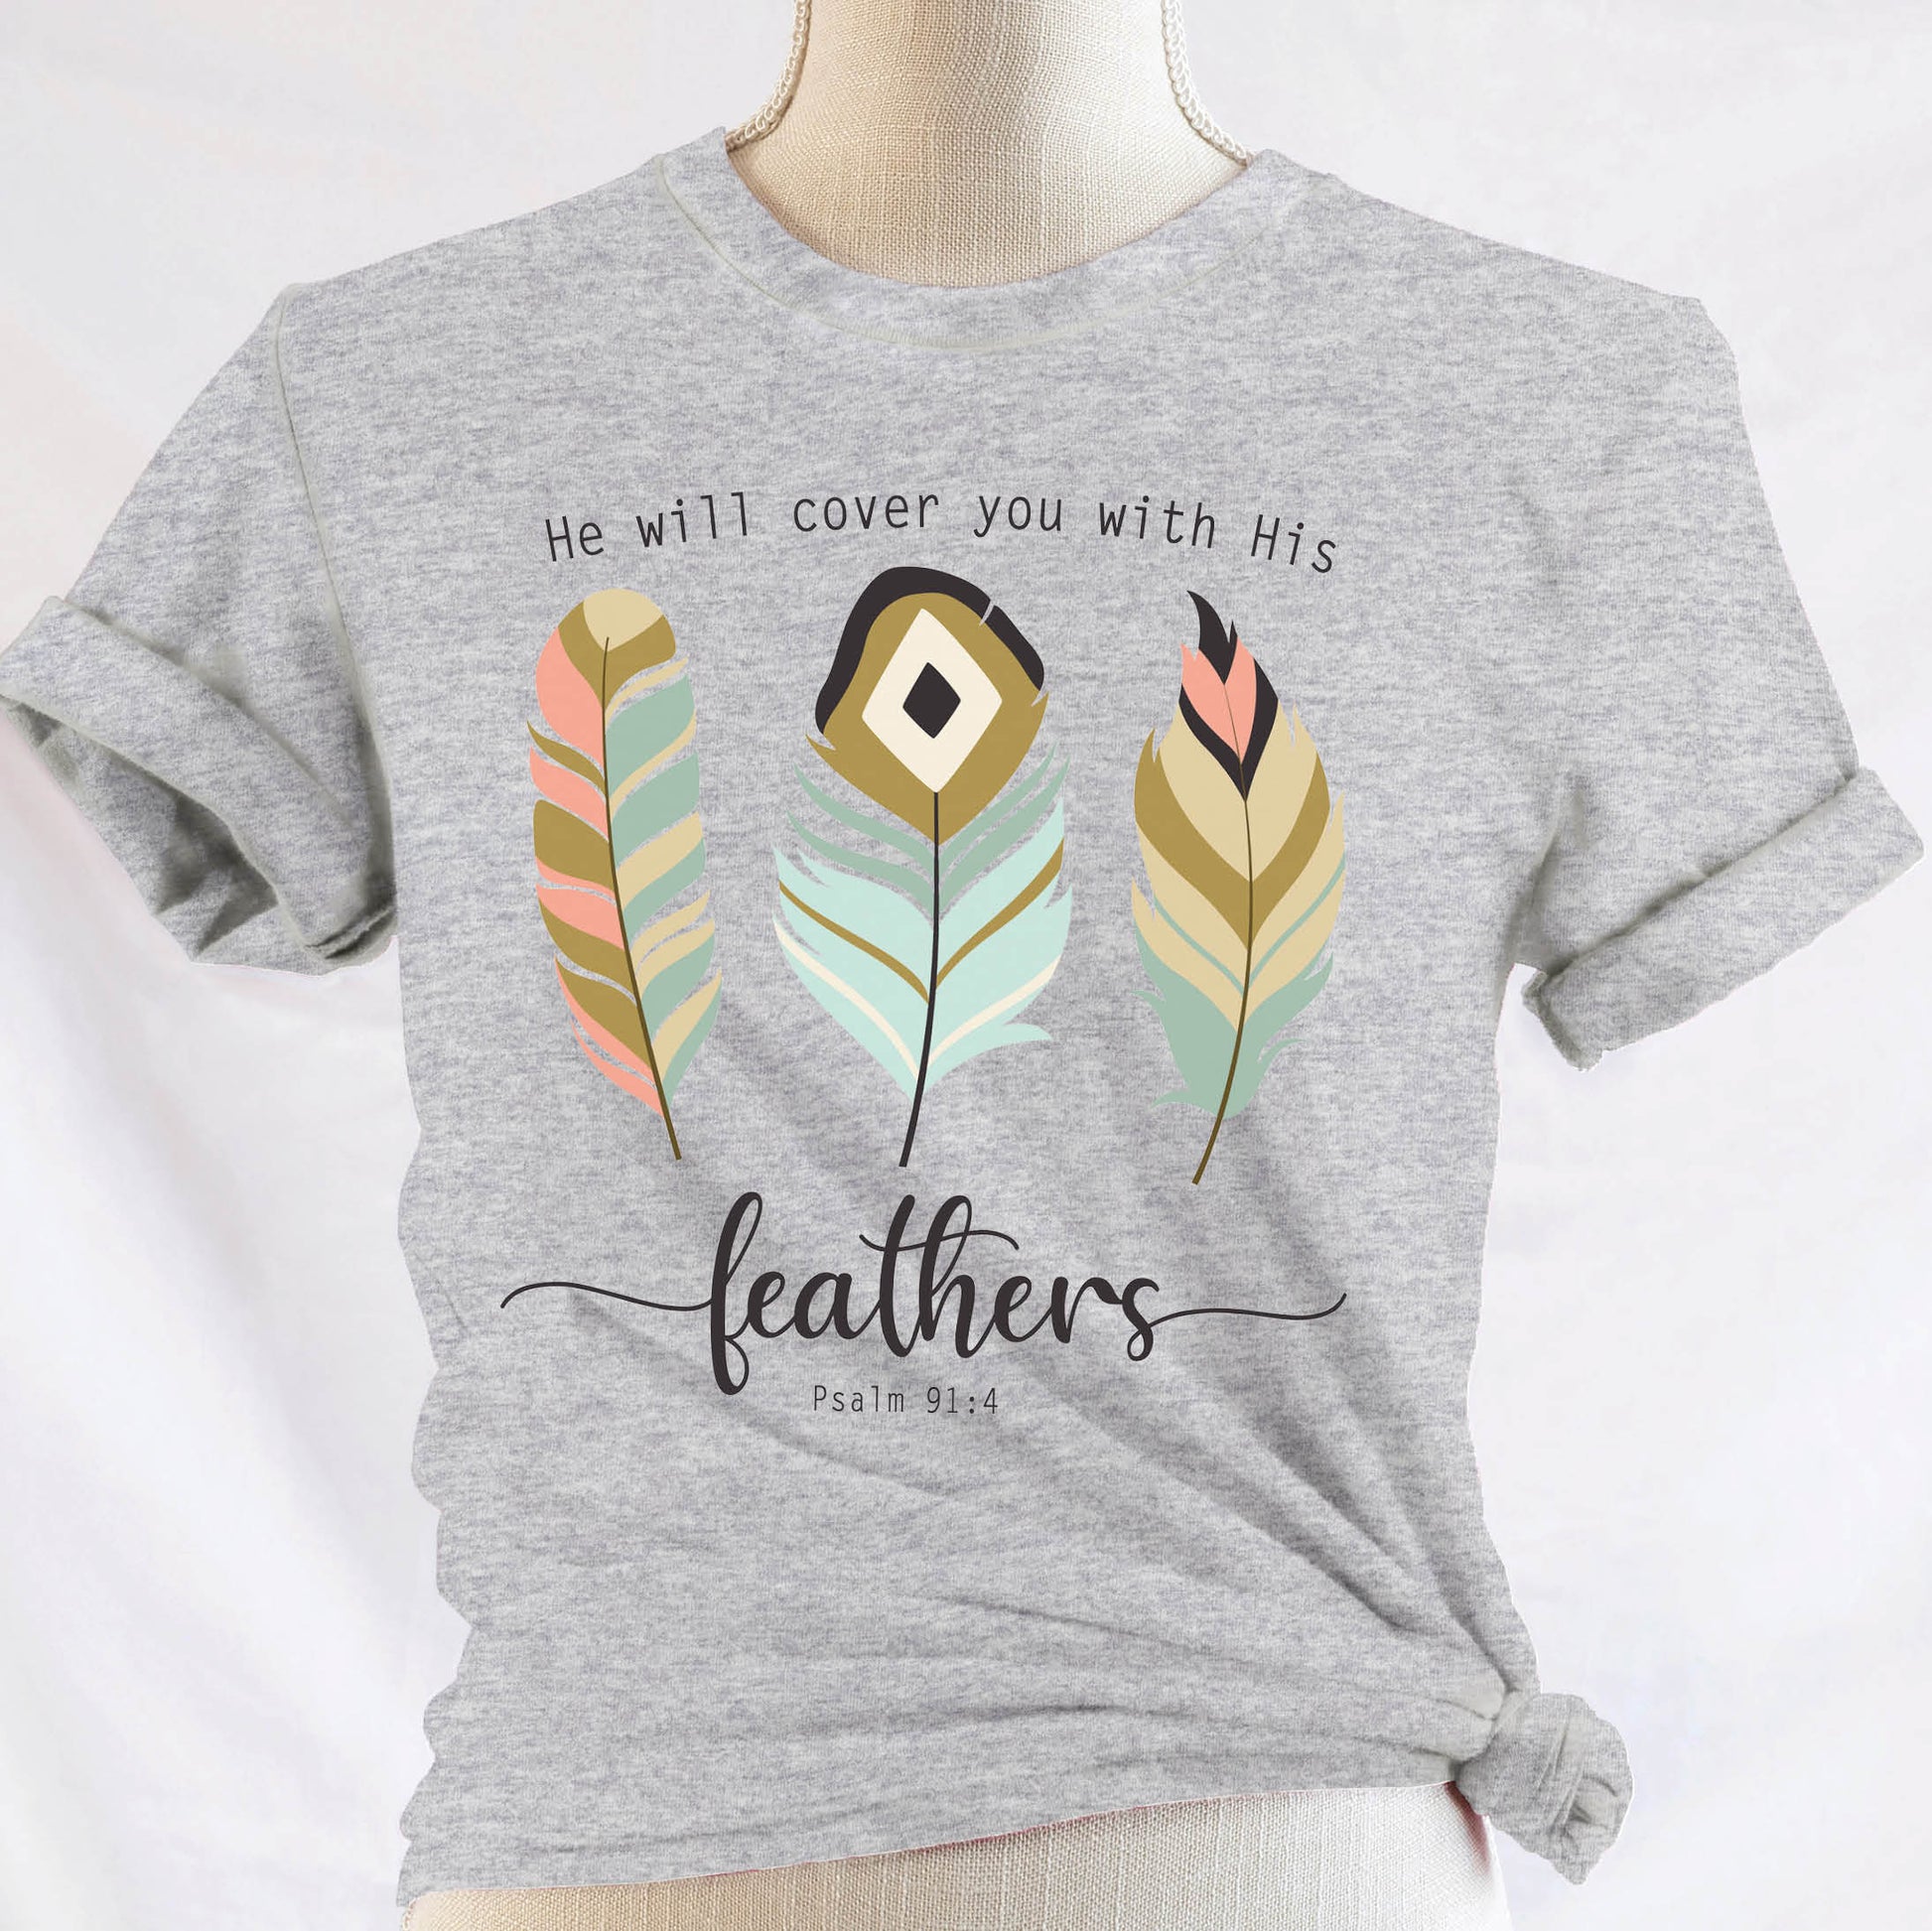 Psalm 91:4 "He Will Cover You With His Feathers" boho bible verse Christian woman aesthetic with teal peach and gold feathers printed on soft heather gray unisex t-shirt for women